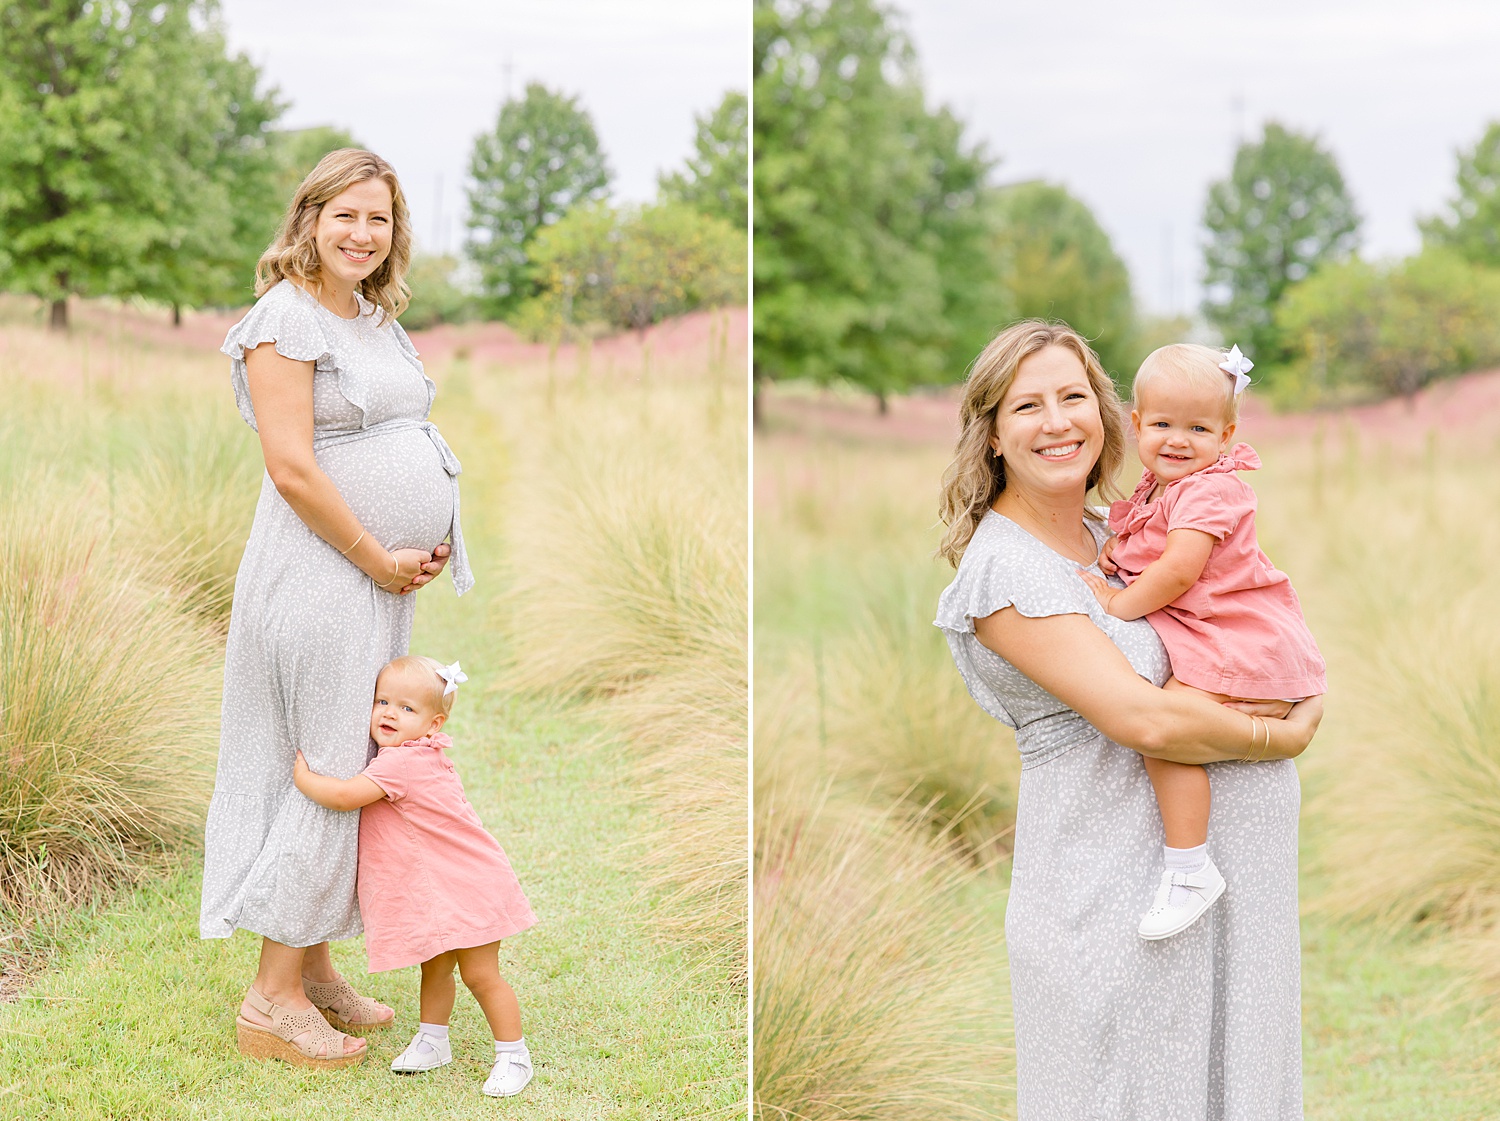 Maternity portraits of mom with little girl 